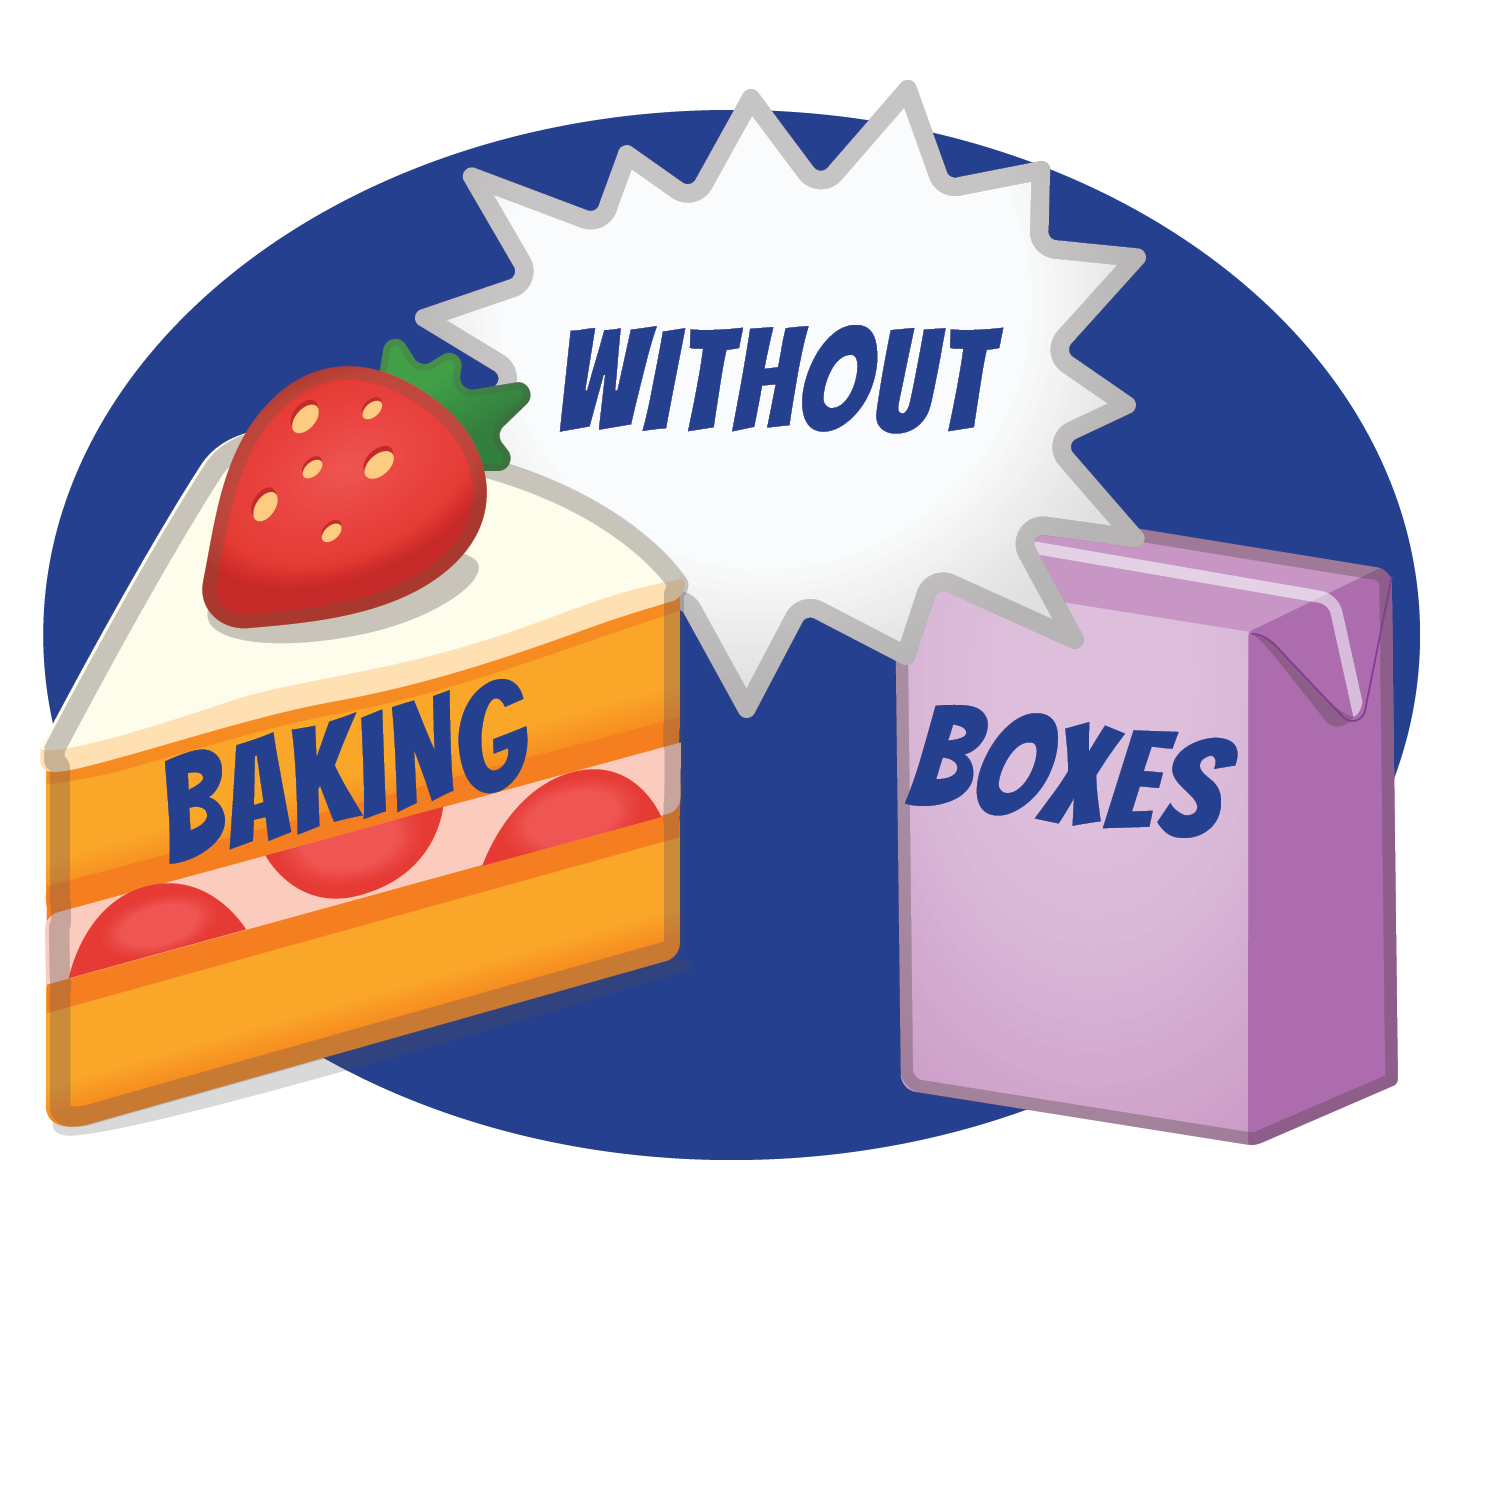 Baking without Boxes